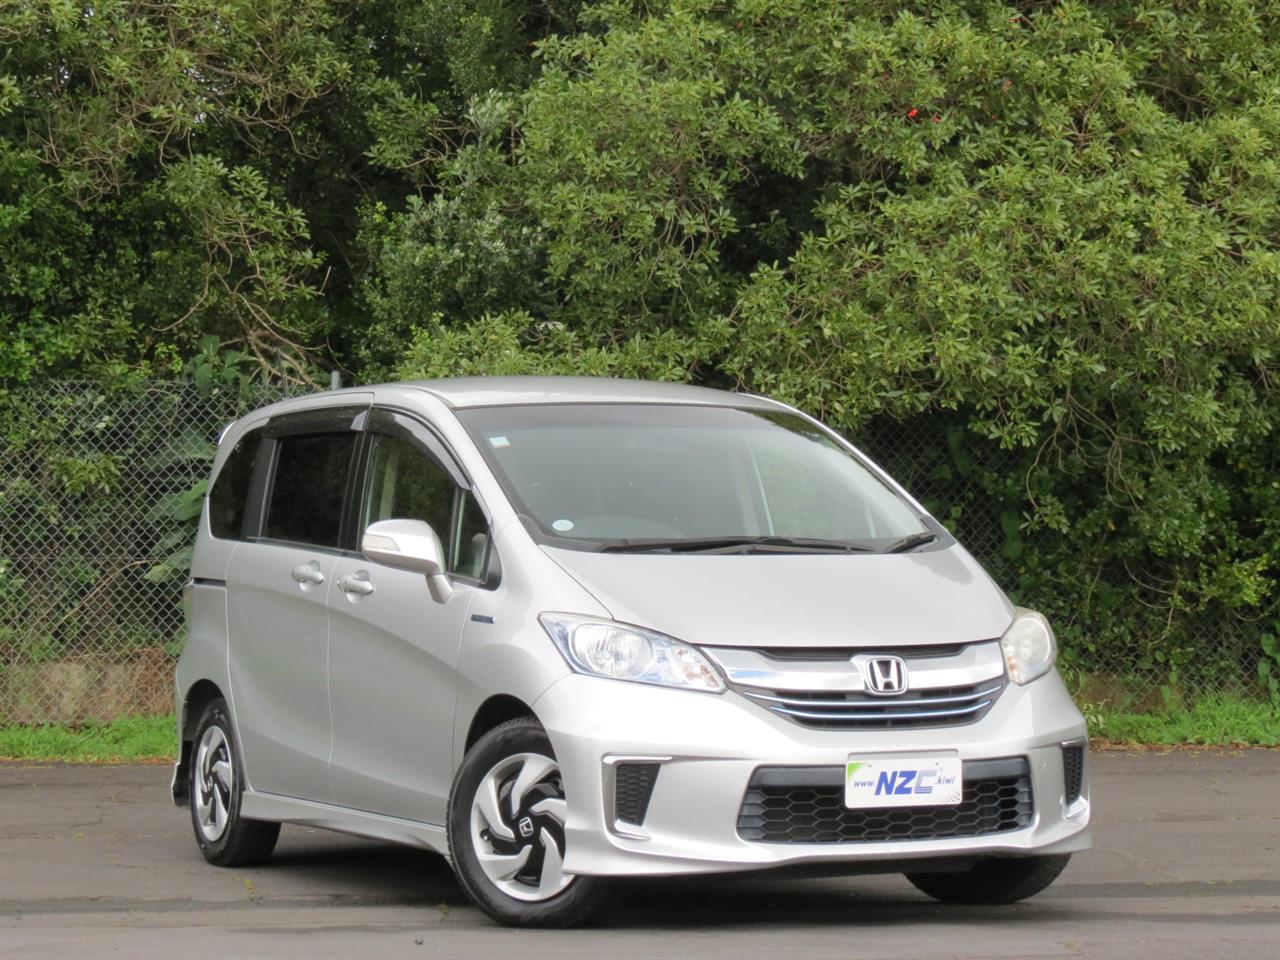 NZC best hot price for 2014 Honda Freed in Auckland